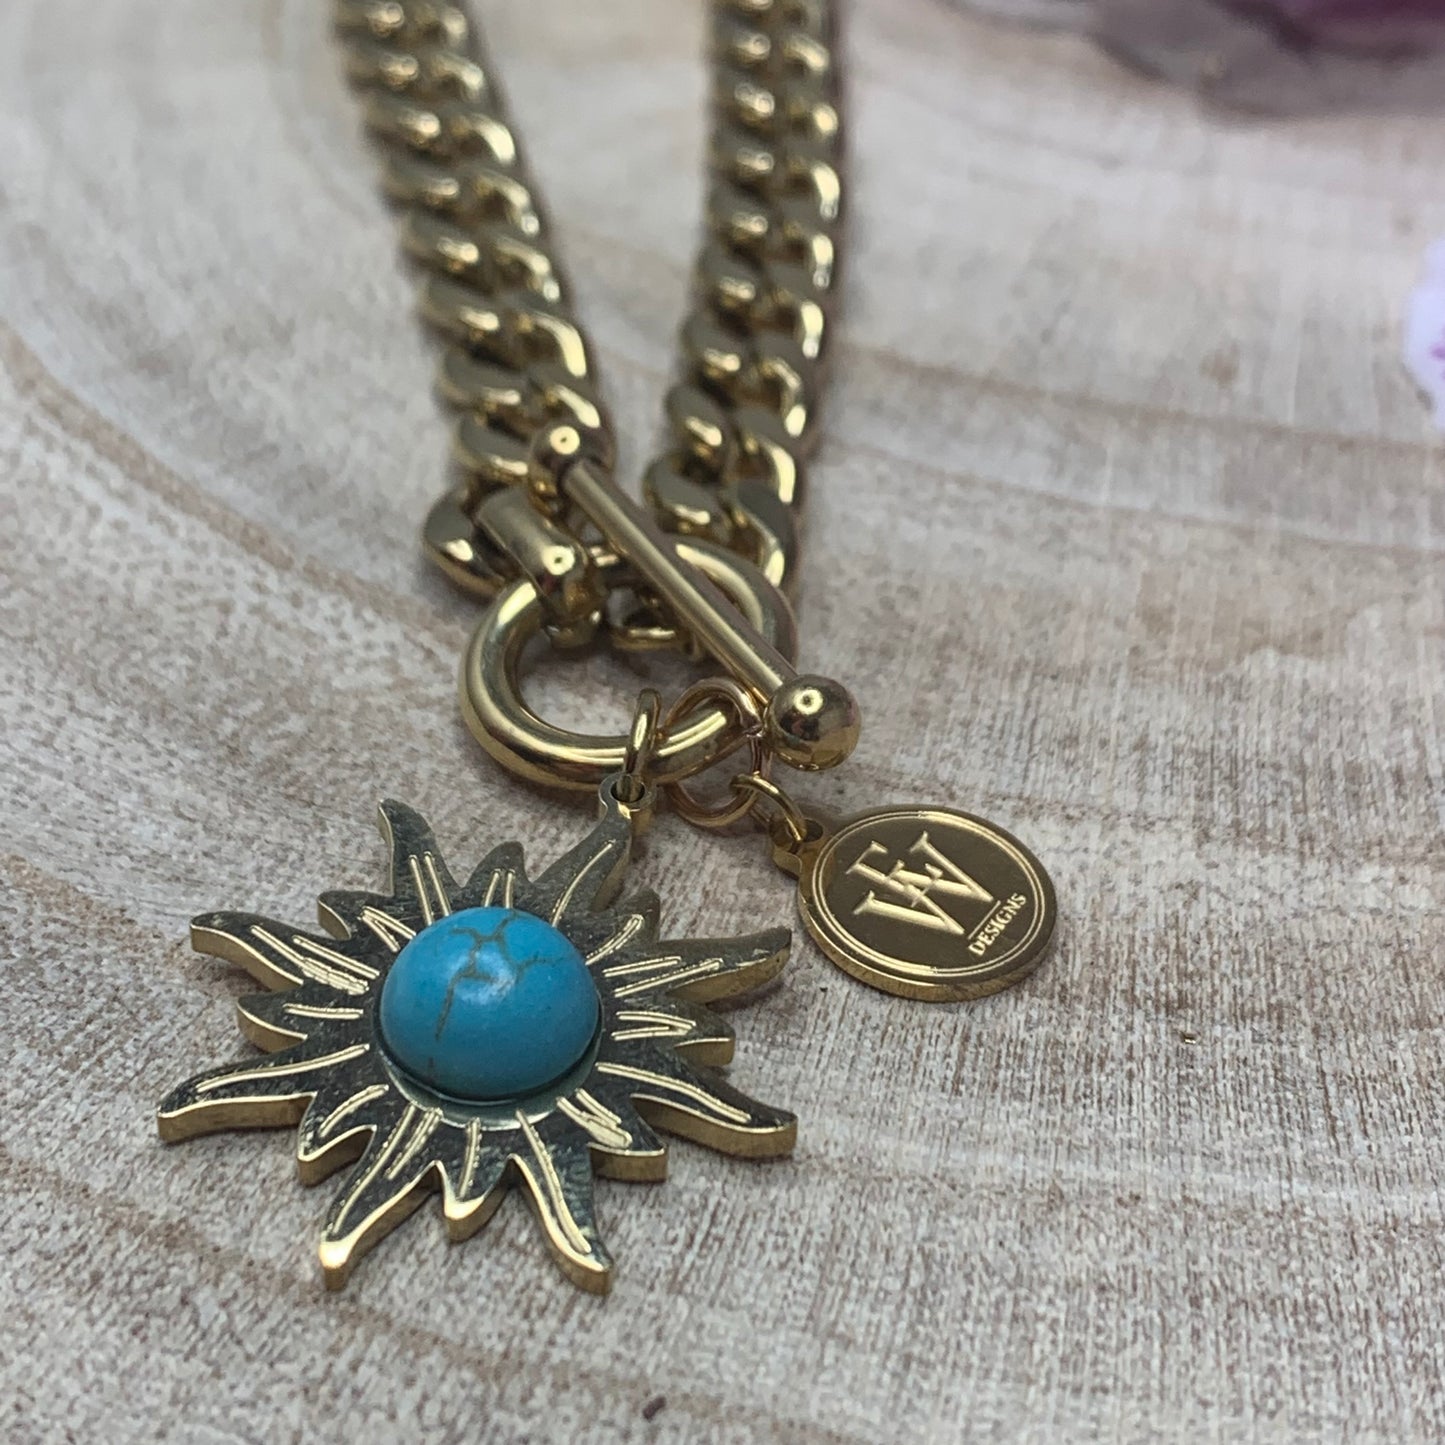 Stainless Chain Linxs with a Sun Shape Pendant and a Turquoise Stone in it.